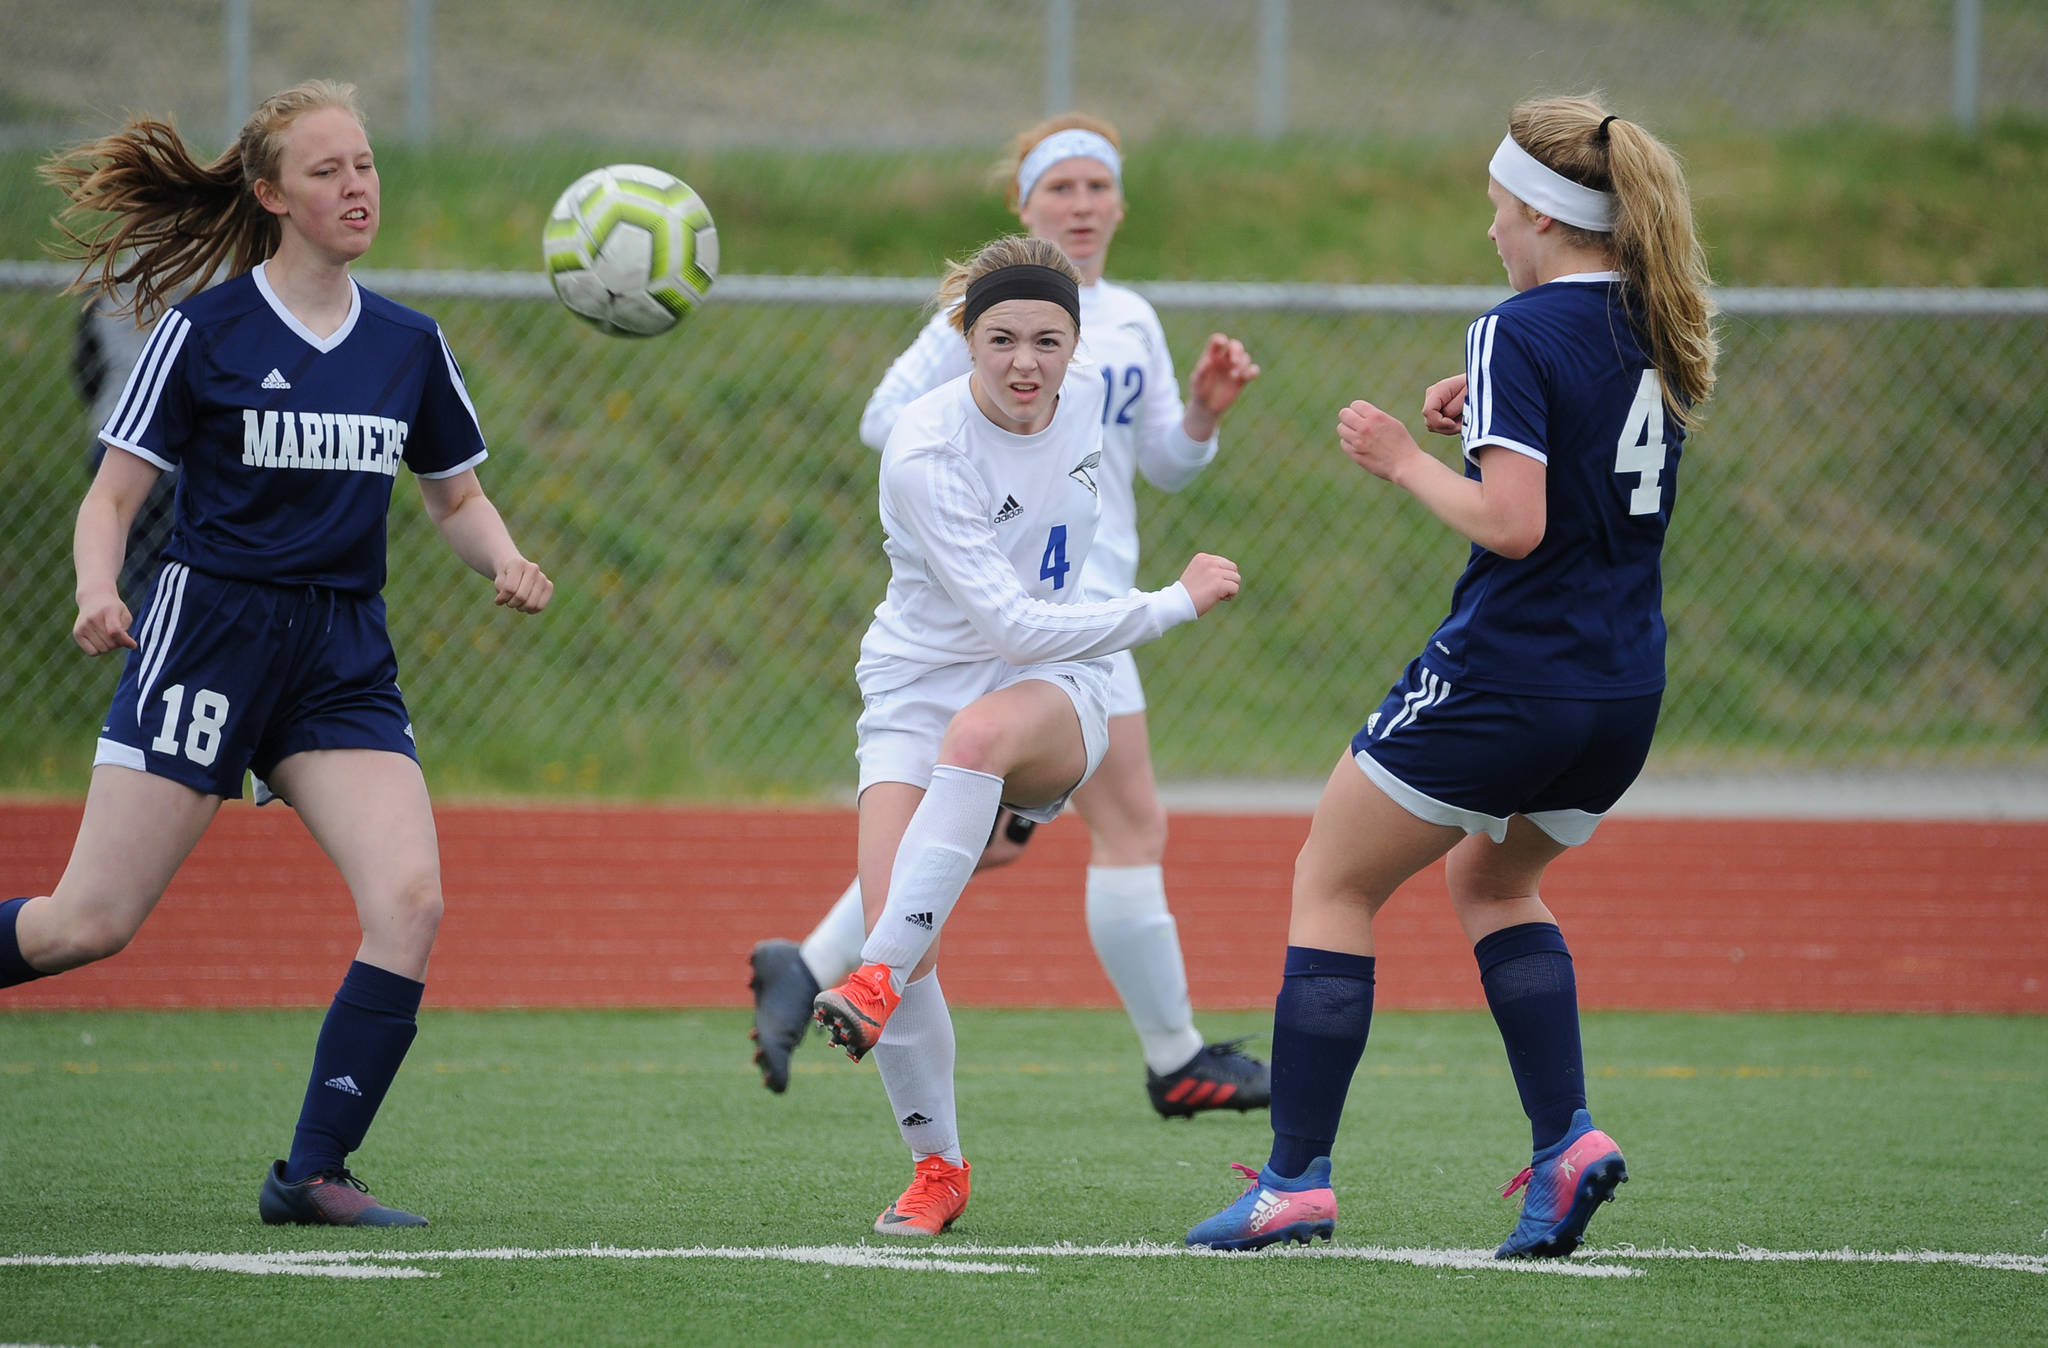 Elizabeth Knapp drives the ball between Homer defenders during their ASAA/First National Bank Alaska soccer state championship match Thursday afternoon at Eagle River High School. (Michael Dinneen | For the Juneau Empire)